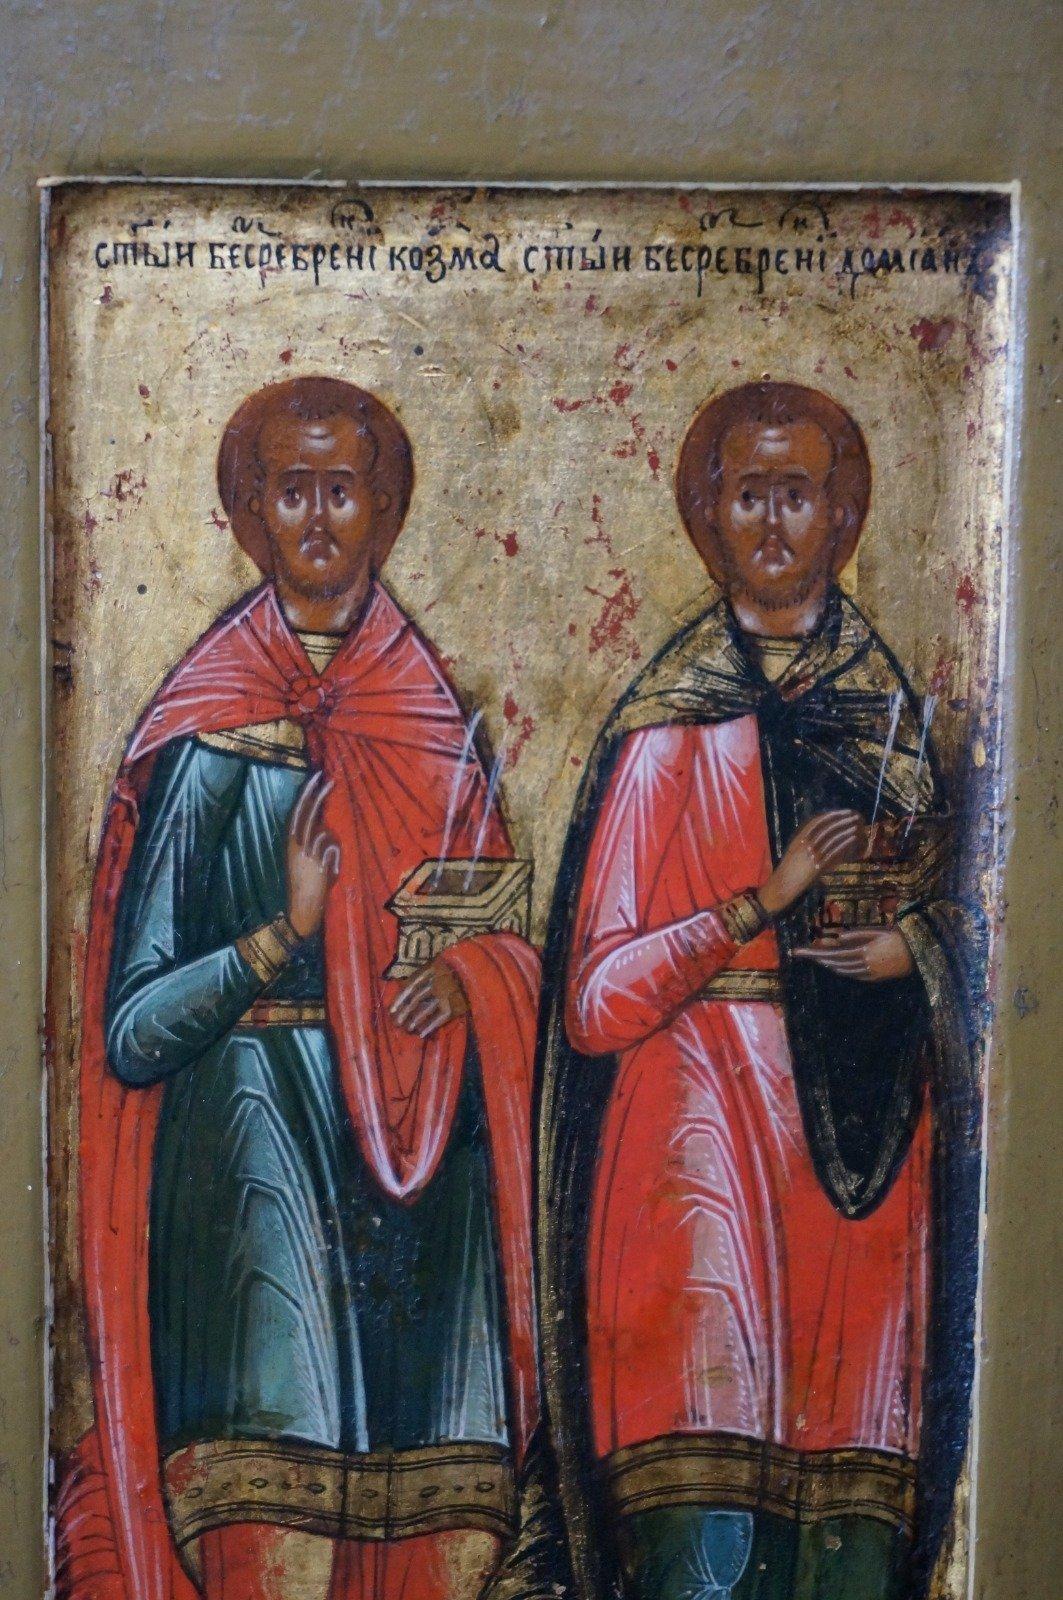 Central Russian miniature icon depicting to Holy Arab twin brothers and physicians Cosmas and Damianus. 

Cosmas and Damianus hailed from Syria . They where so called Agioi Anargyroi , ( literally they who take no silver) and offered their medical